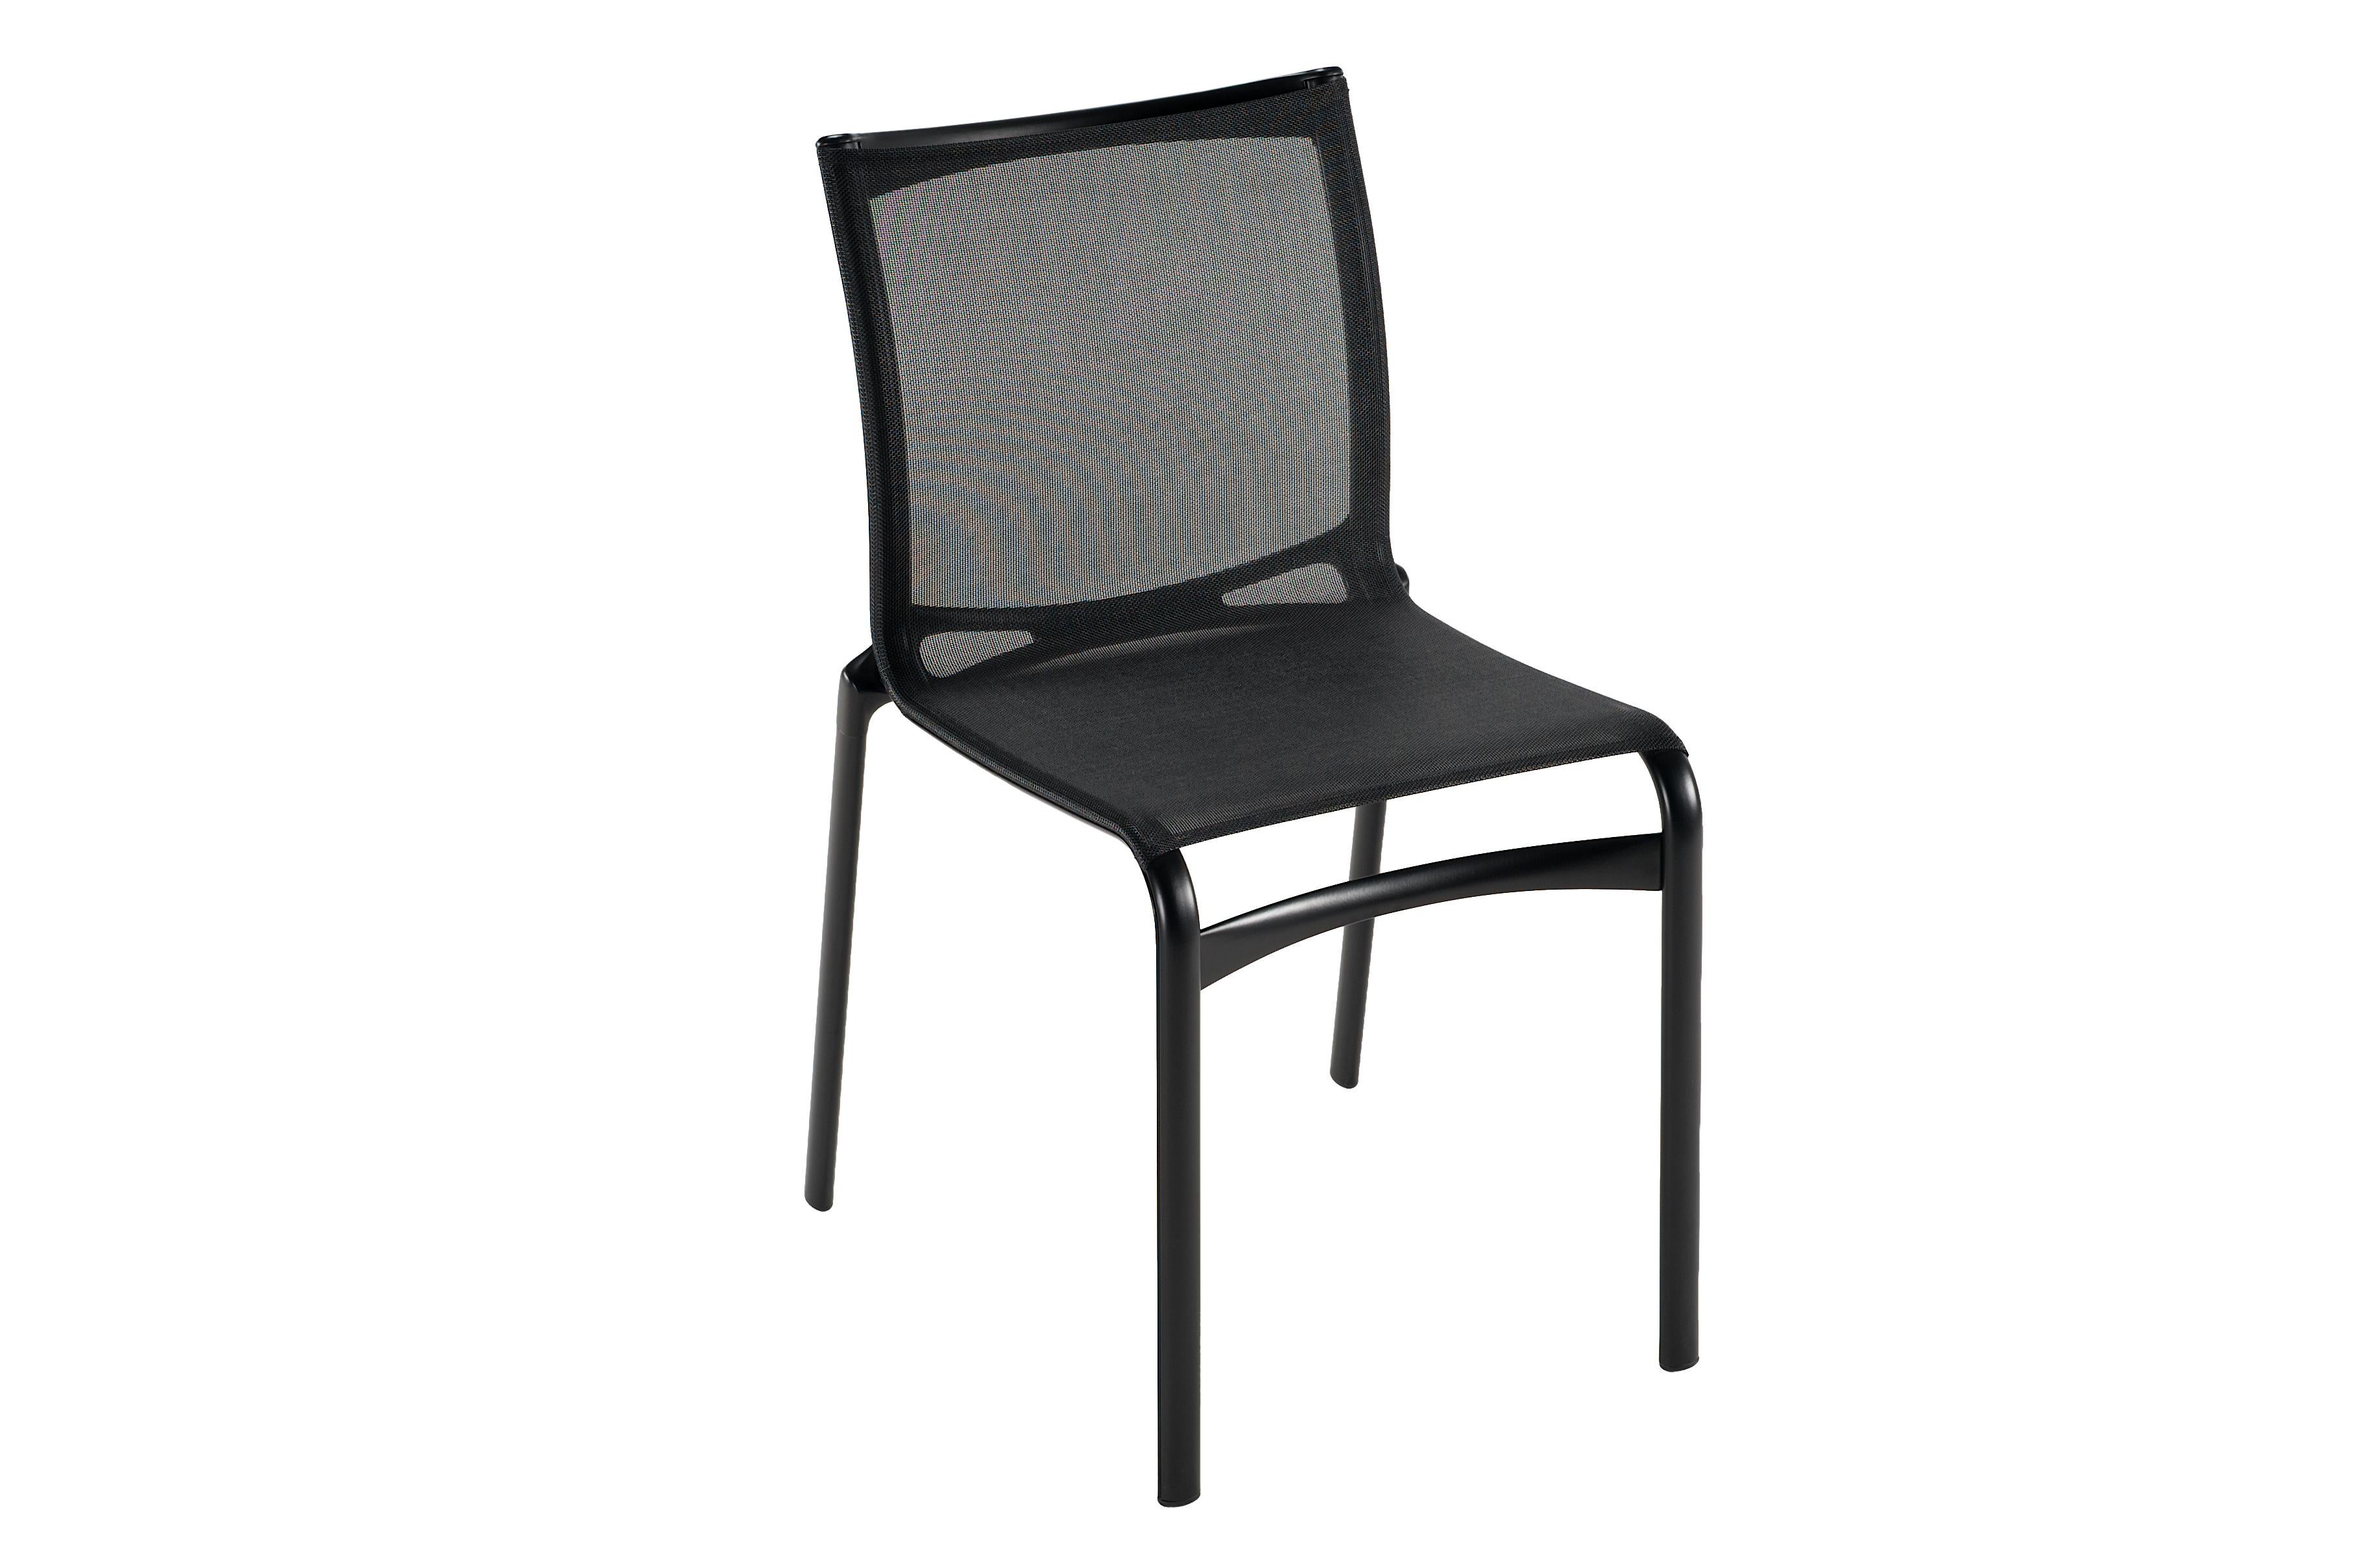 Alias Bigframe 44 Chair in Black Mesh Seat with Lacquered Aluminium Frame In New Condition For Sale In Brooklyn, NY